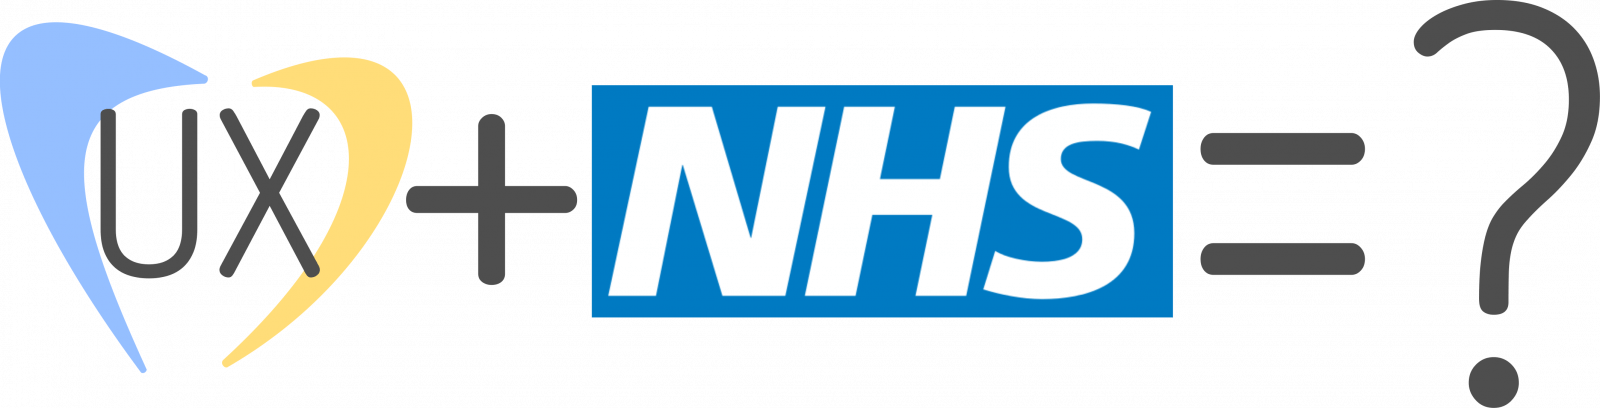 Can better UX improve the nhs?